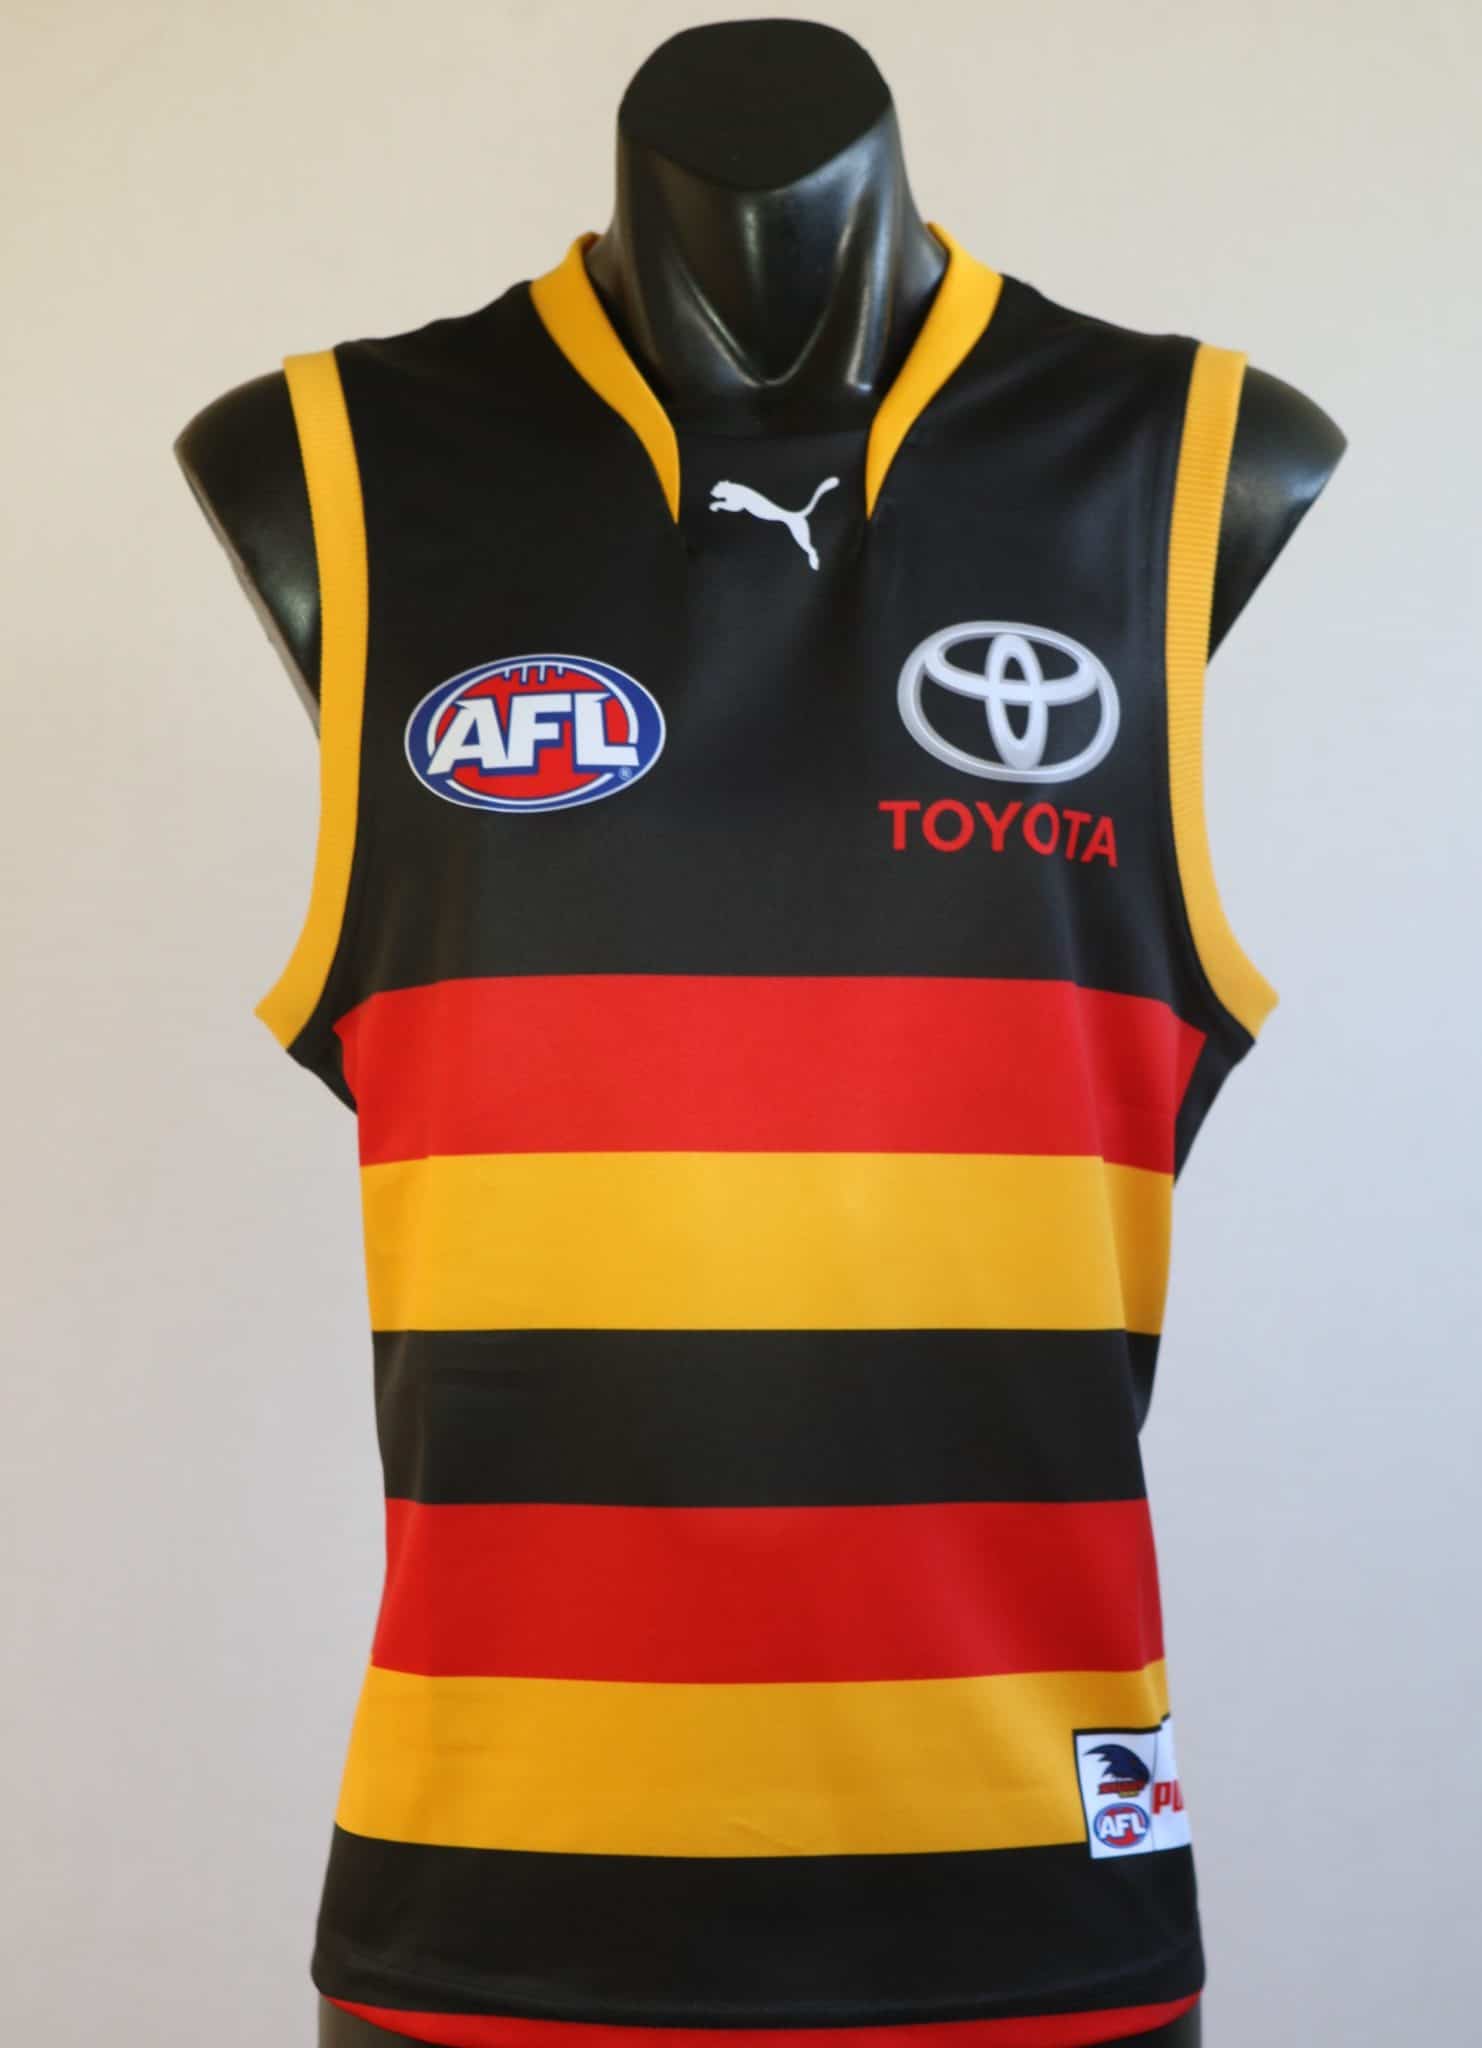 Check out every club's Indigenous jumper